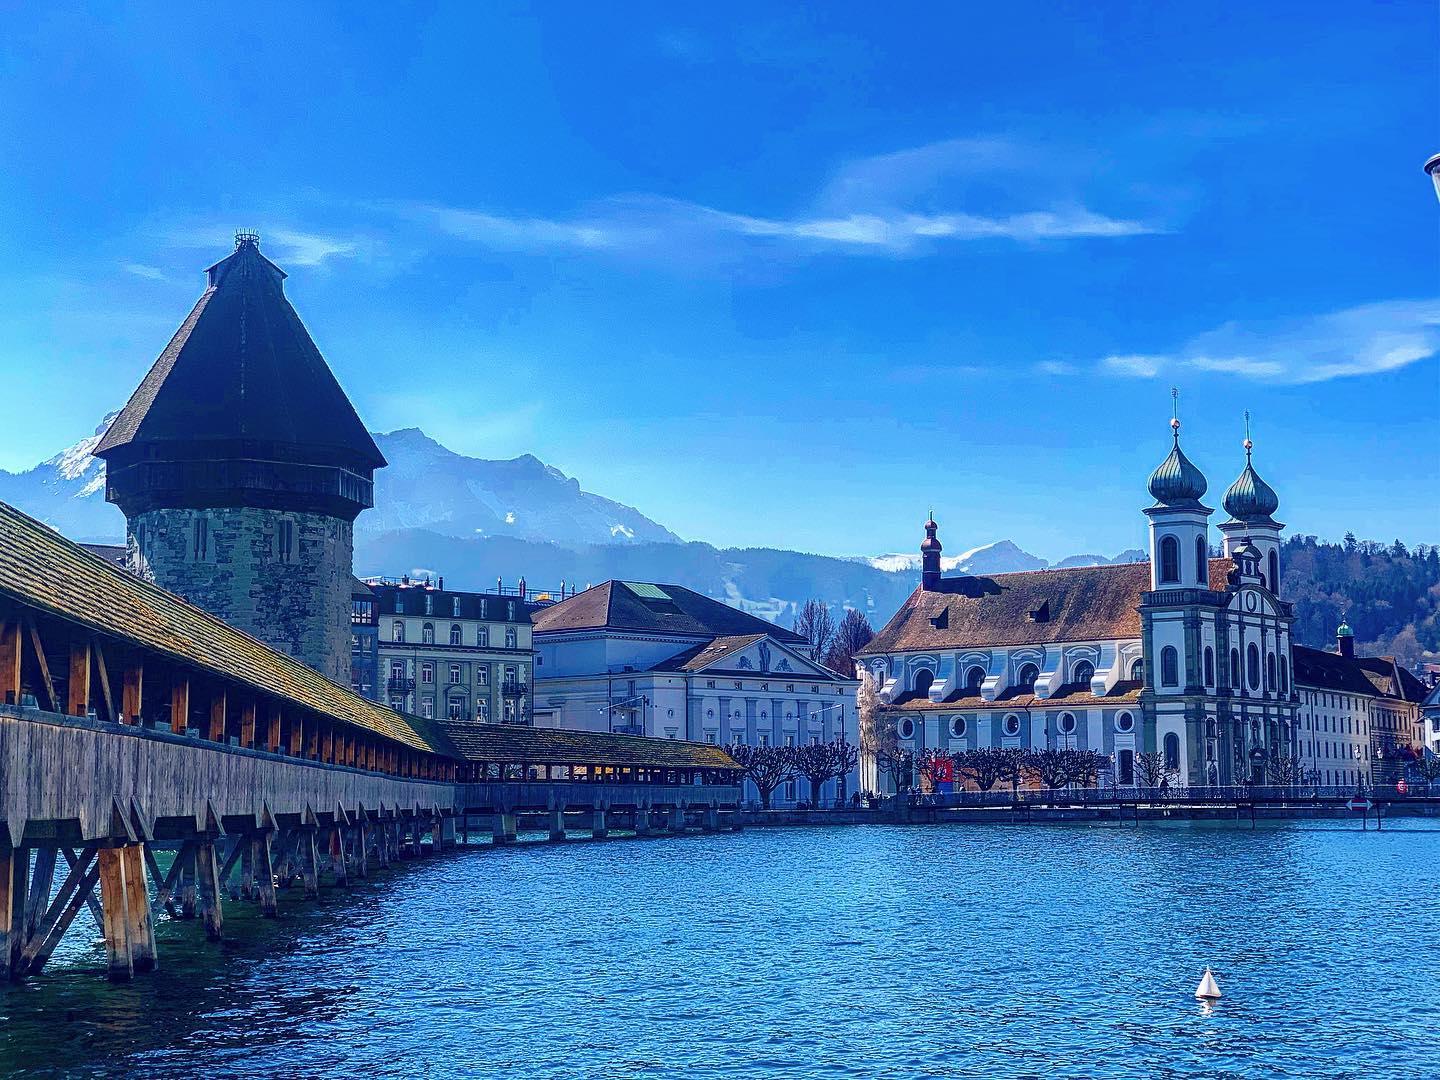 Lucerne, Switzerland 📍
•
•
•
#love #instagood #photooftheday #beautiful #happy #cute #tbt #like4like #pic #selfie #summer #friends #repost #nature #fun #style #lucerne #switzerland #alps #mountains #views #God #country #explorer #exploration #adventure  #thejollygringo